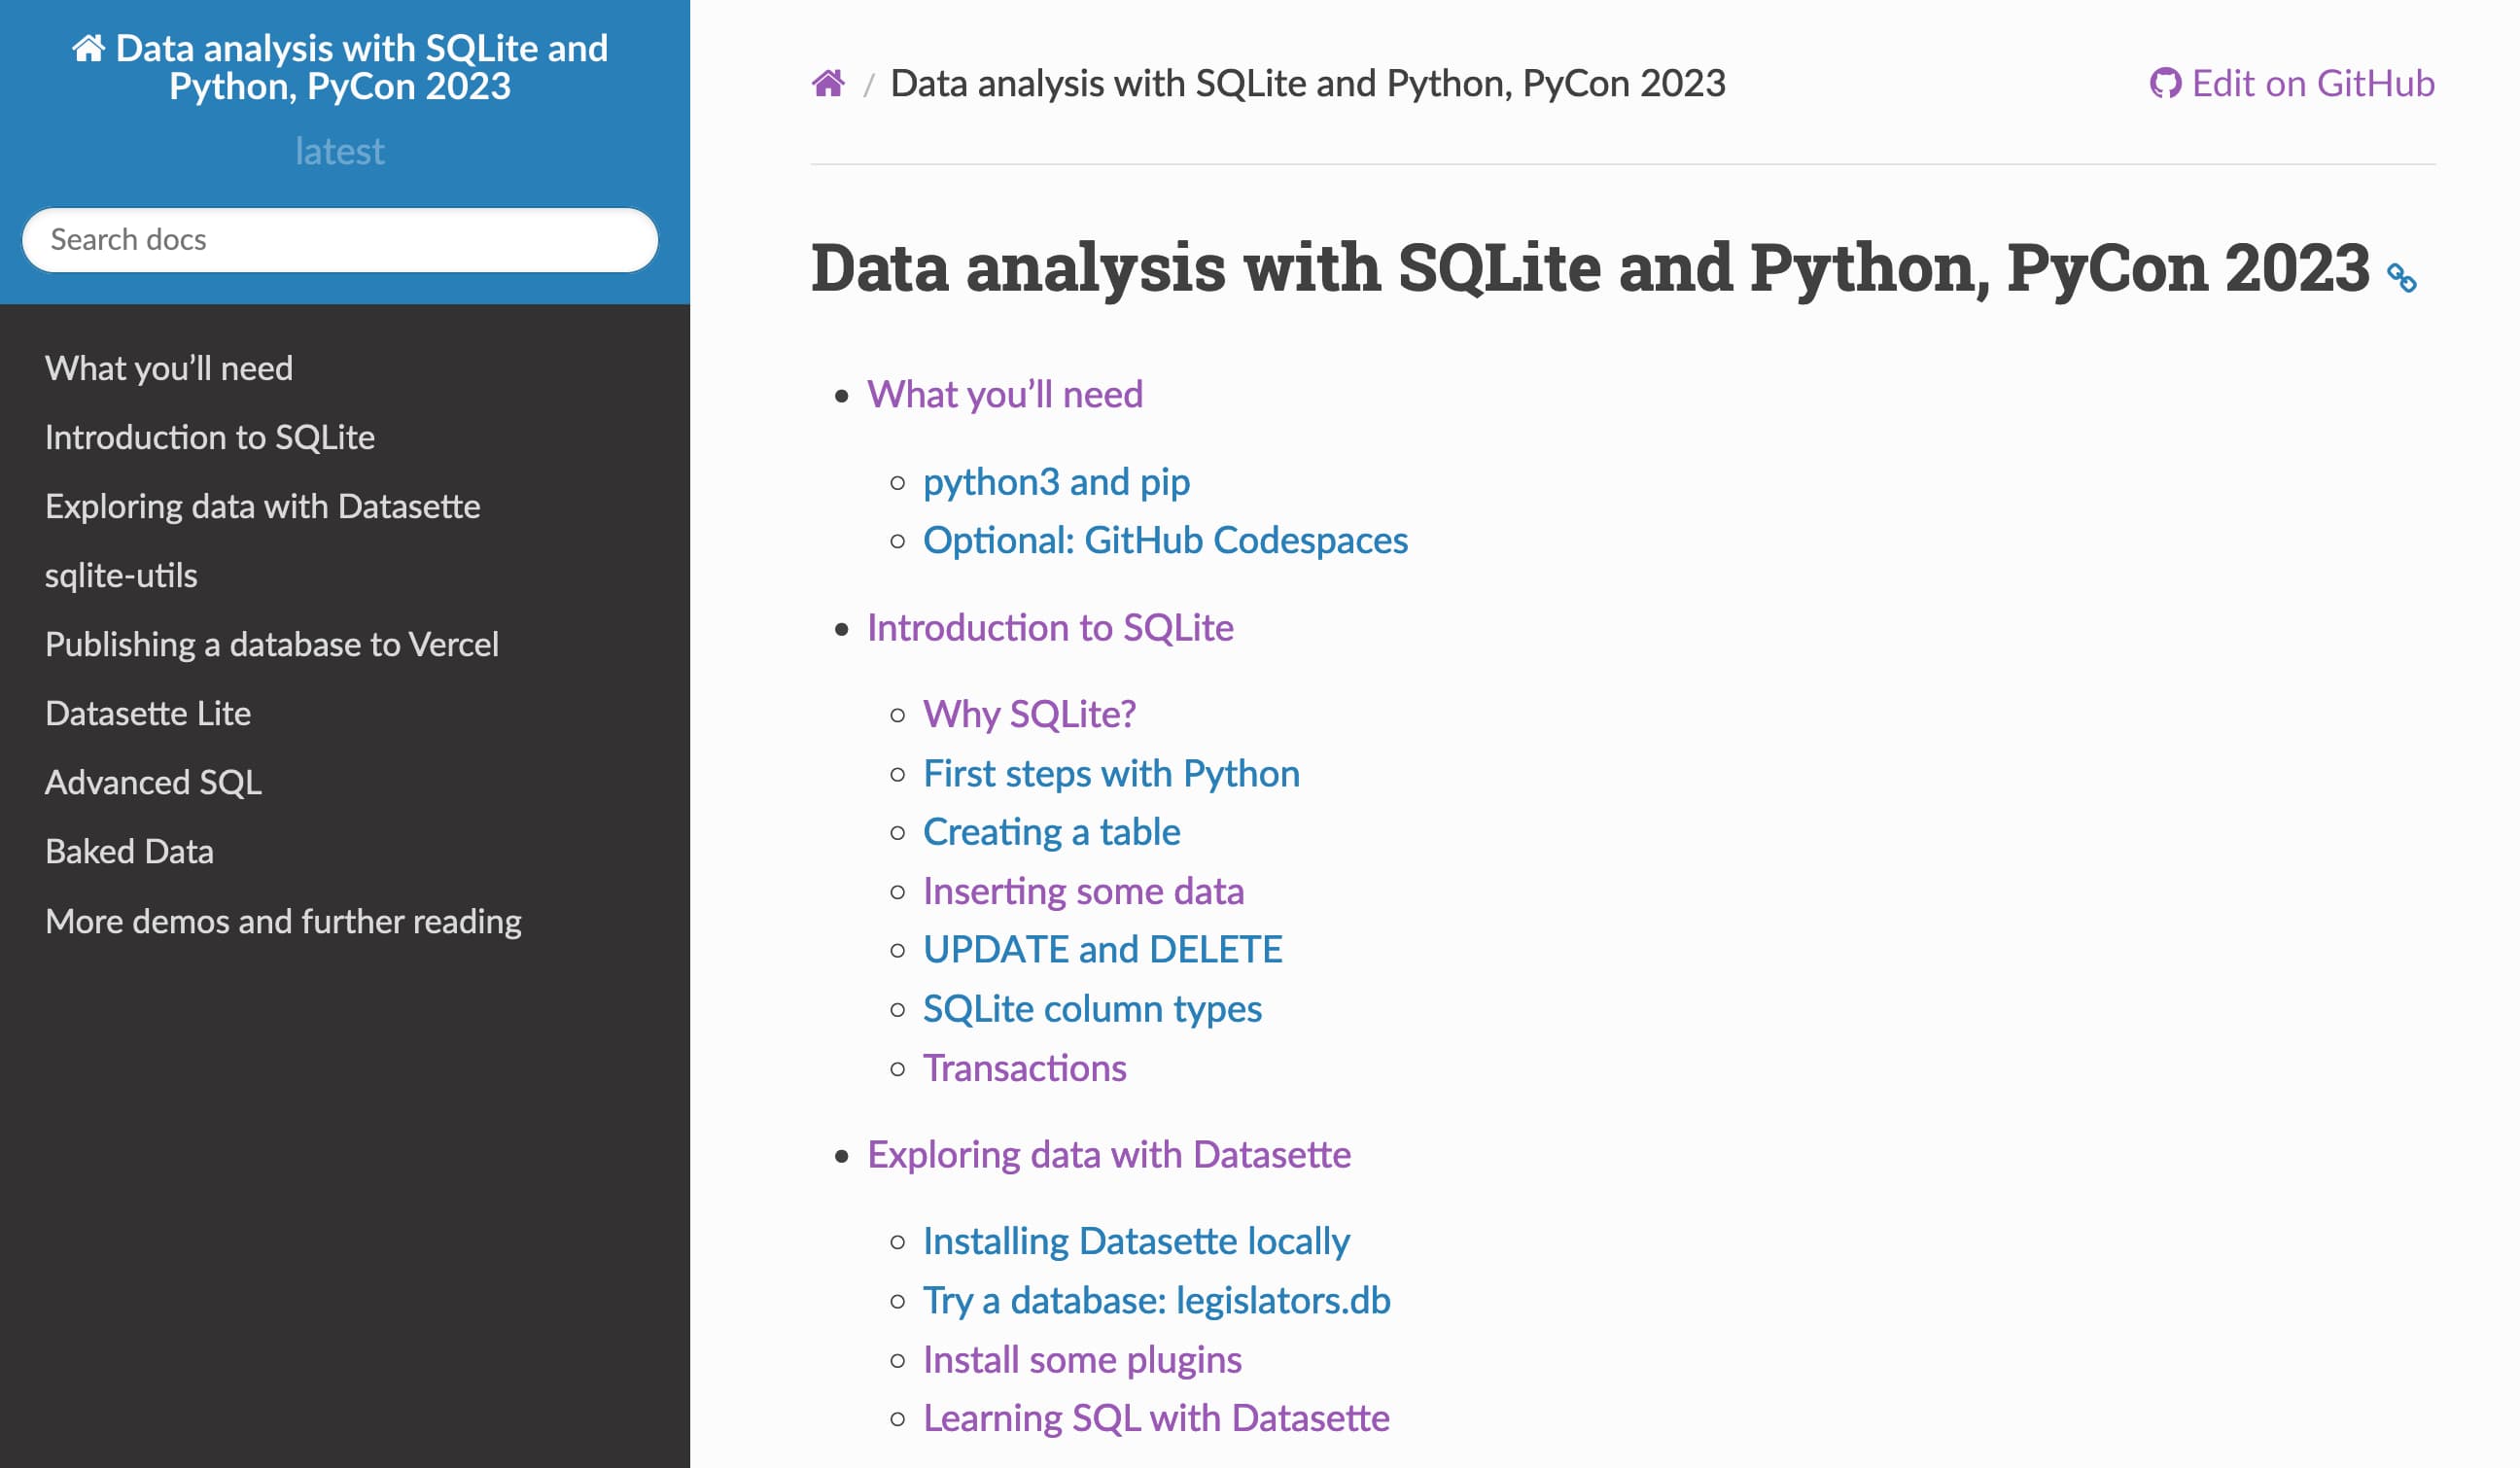 Screenshot of the handout. Data analysis with SQLite and Python, PyCon 2023

    What you’ll need
        python3 and pip
        Optional: GitHub Codespaces
    Introduction to SQLite
        Why SQLite?
        First steps with Python
        Creating a table
        Inserting some data
        UPDATE and DELETE
        SQLite column types
        Transactions
    Exploring data with Datasette
        Installing Datasette locally
        Try a database: legislators.db
        Install some plugins
        Learning SQL with Datasette
